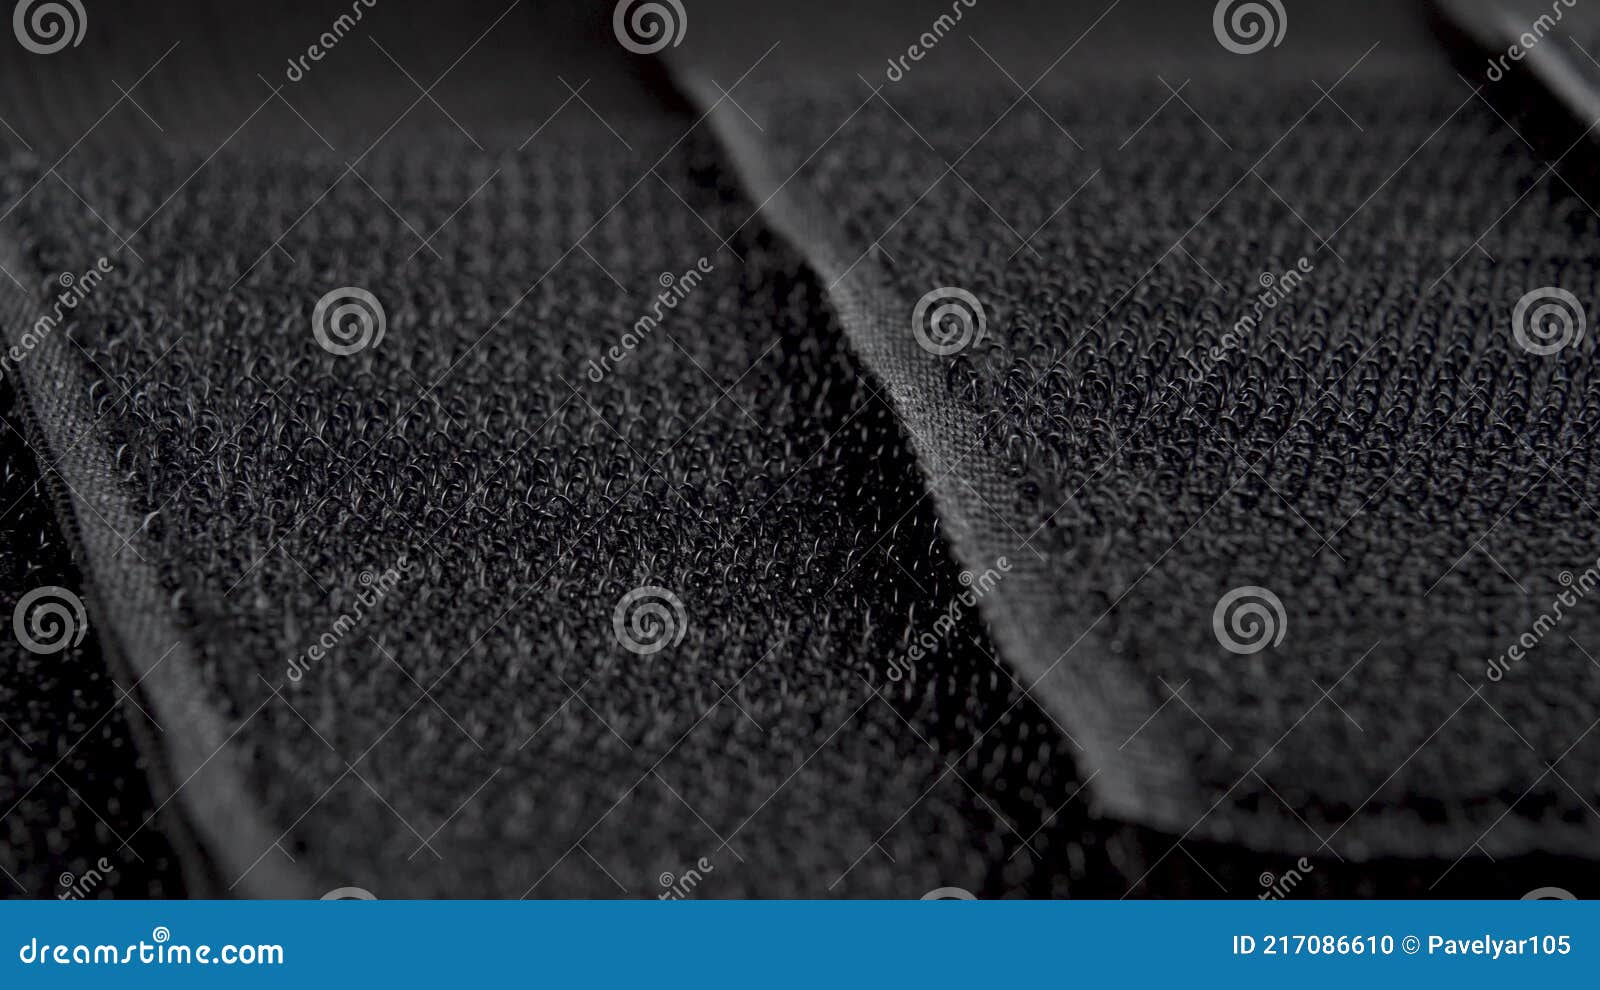 Velcro on Black Textile Tapes Close-up. Textured Abstract Dark